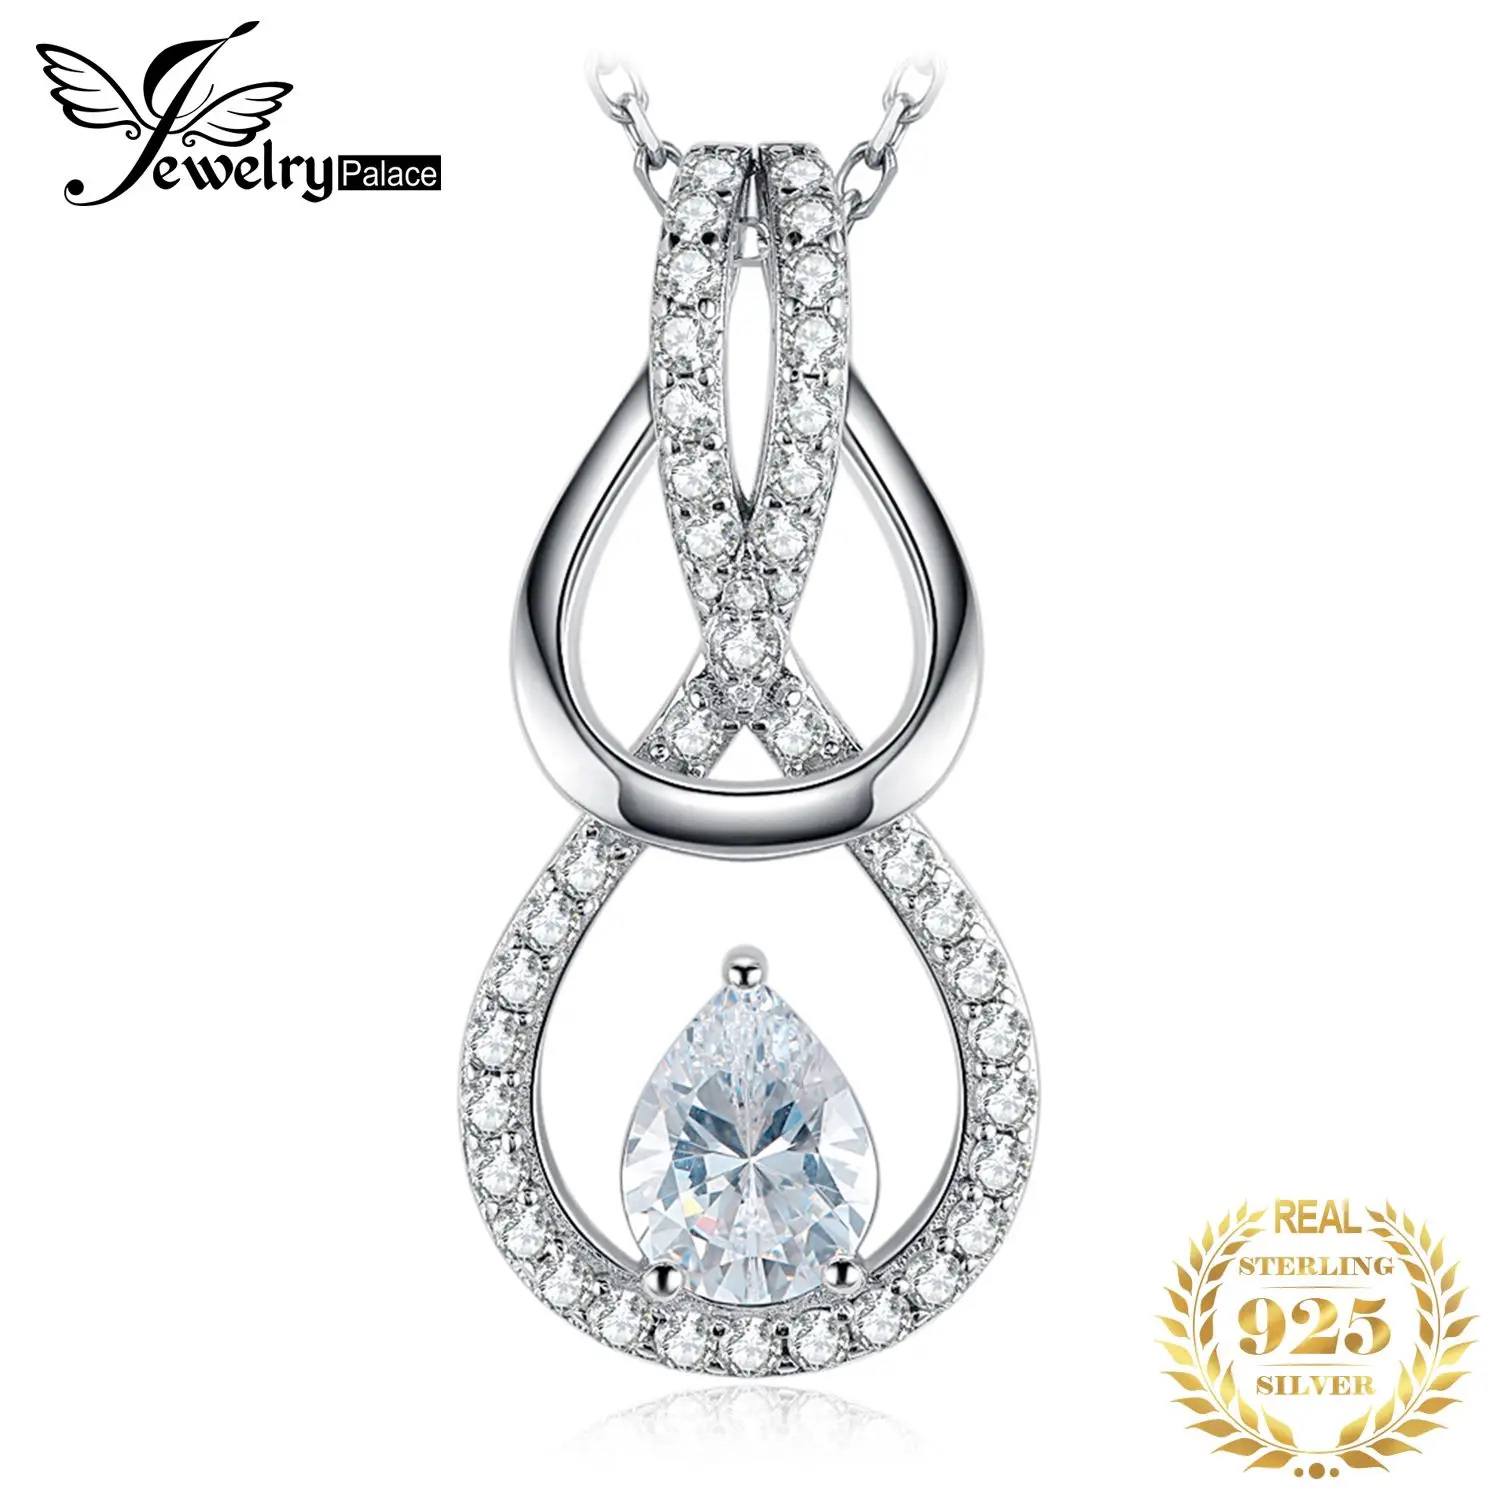 JewelryPalace New Arrival Infinity Love Knot 2.6ct Gemstone 925 Sterling Silver Pendant Necklace for Woman Classic Gift No Chain